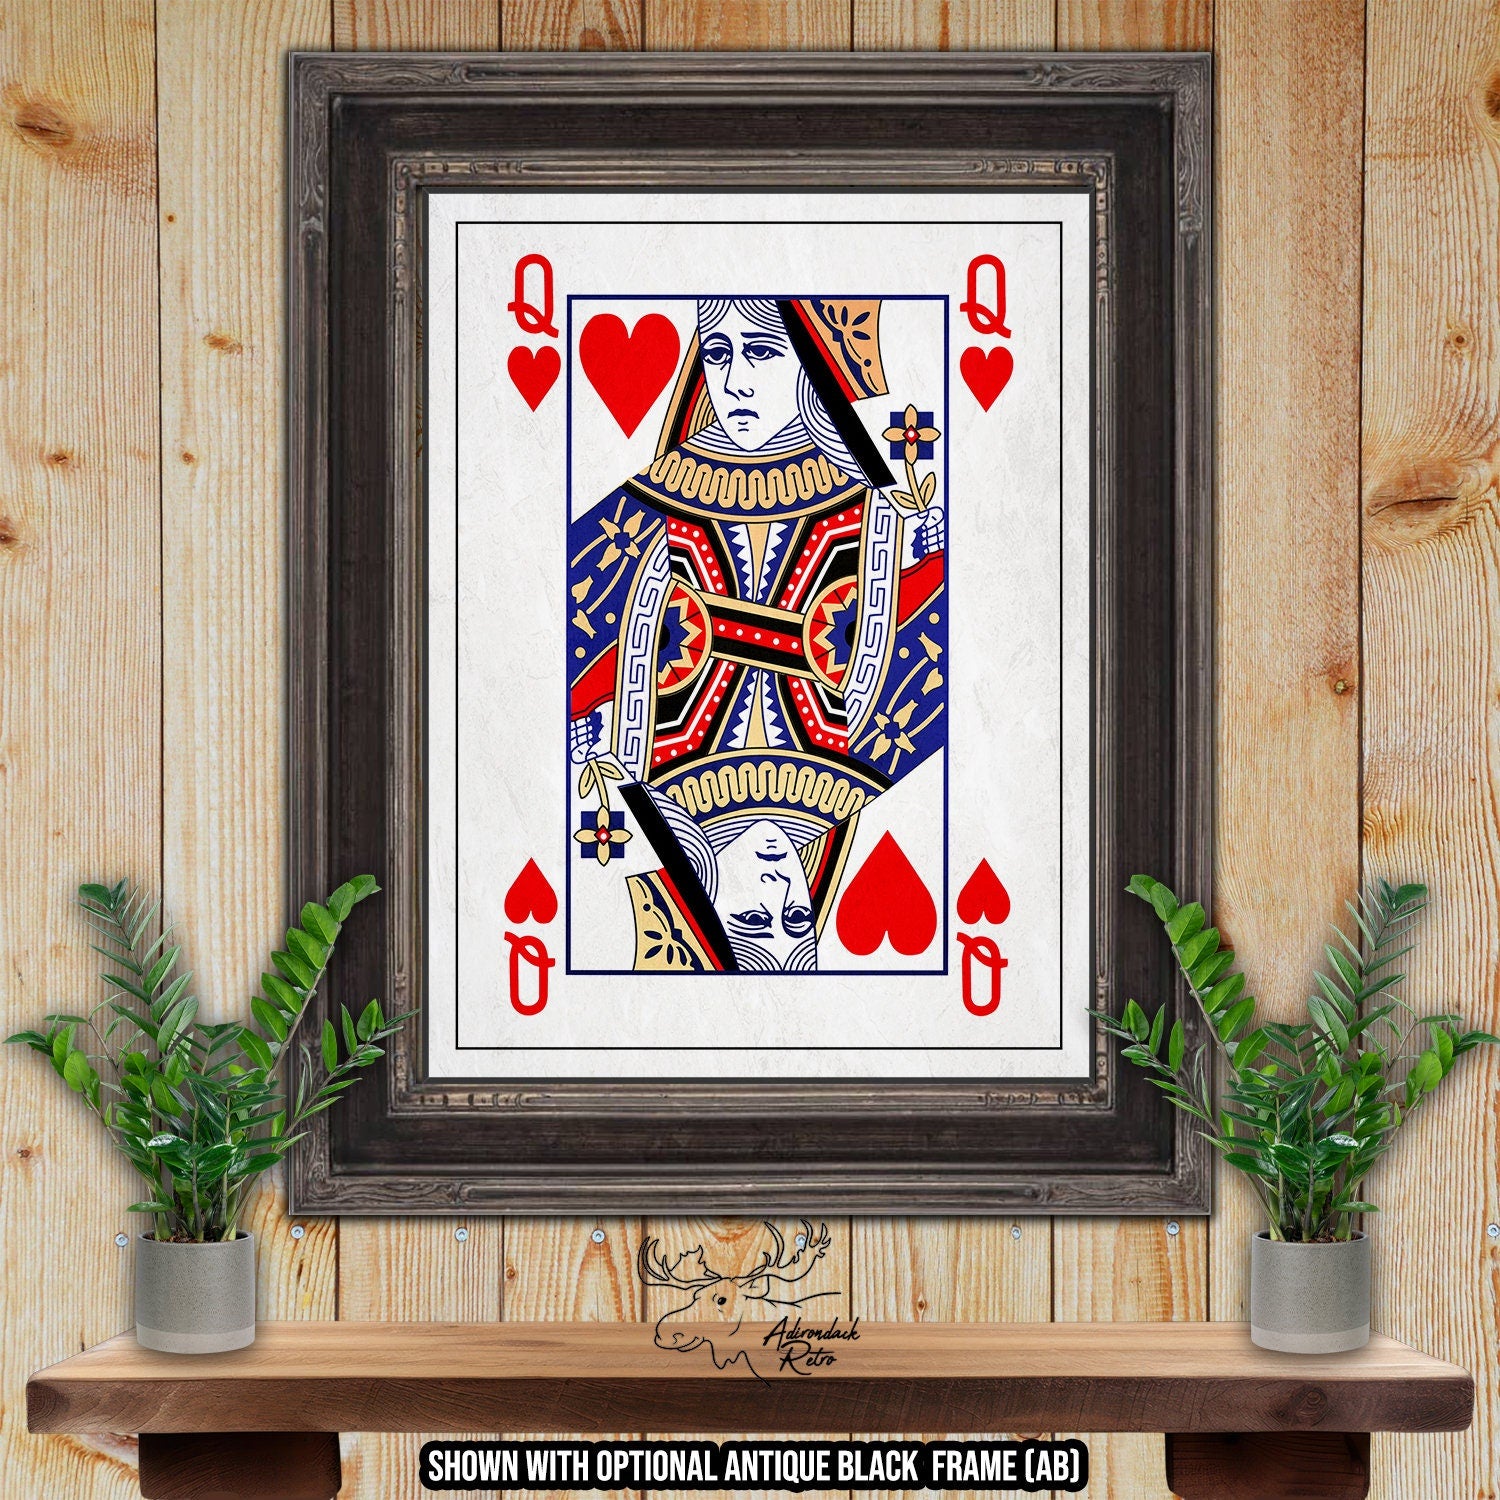 Queen of Hearts Fine Art Poker Print - Playing Card Poster at Adirondack Retro